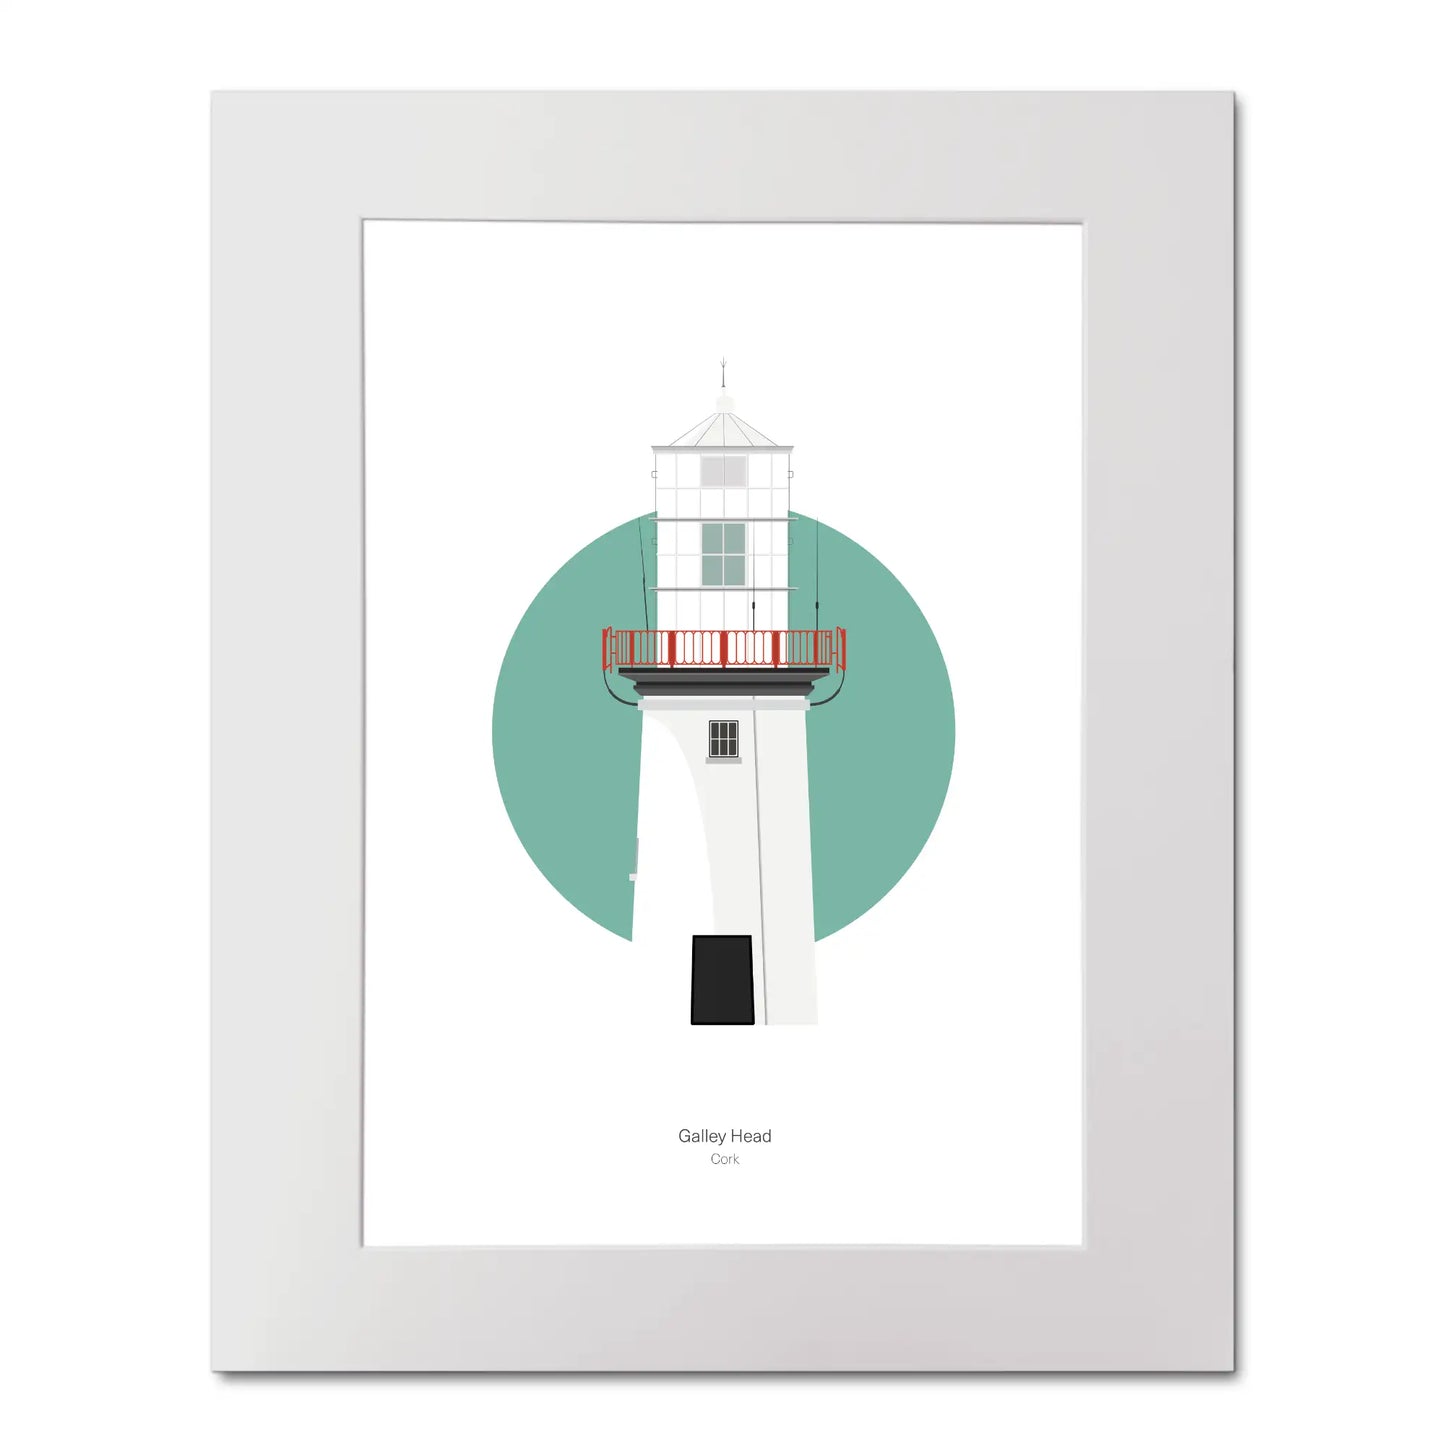 Illustration of Galley Head lighthouse on a white background inside light blue square, mounted and measuring 40x50cm.